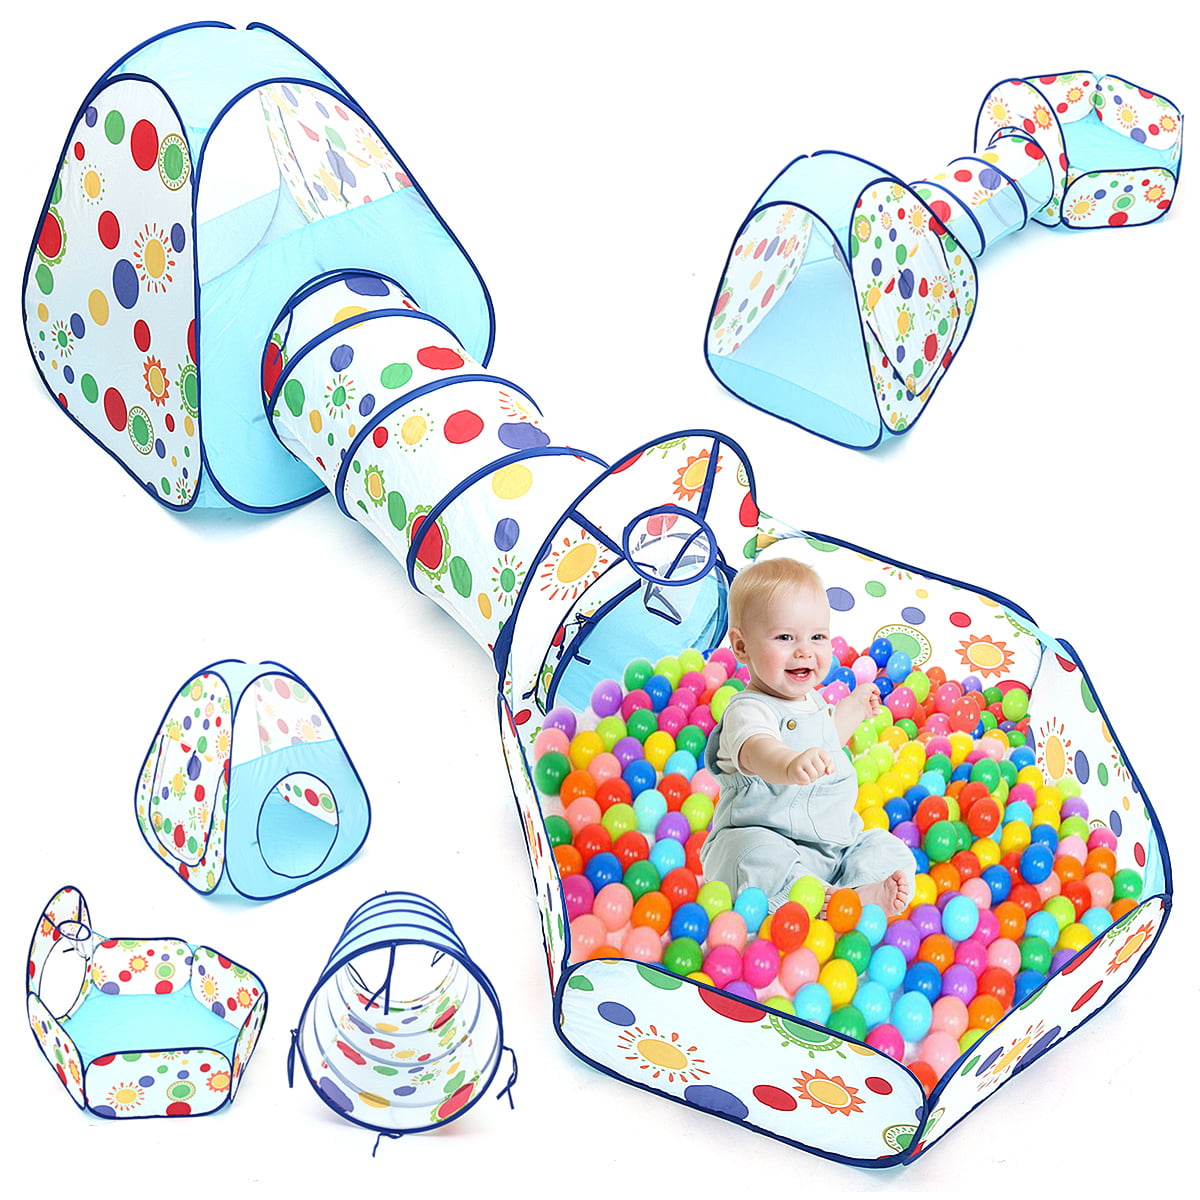 Kids Crawl Play Tunnel with Safety Meshing for Children Visibility 4.3 Foot Folding Playhouse Tunnel Toy